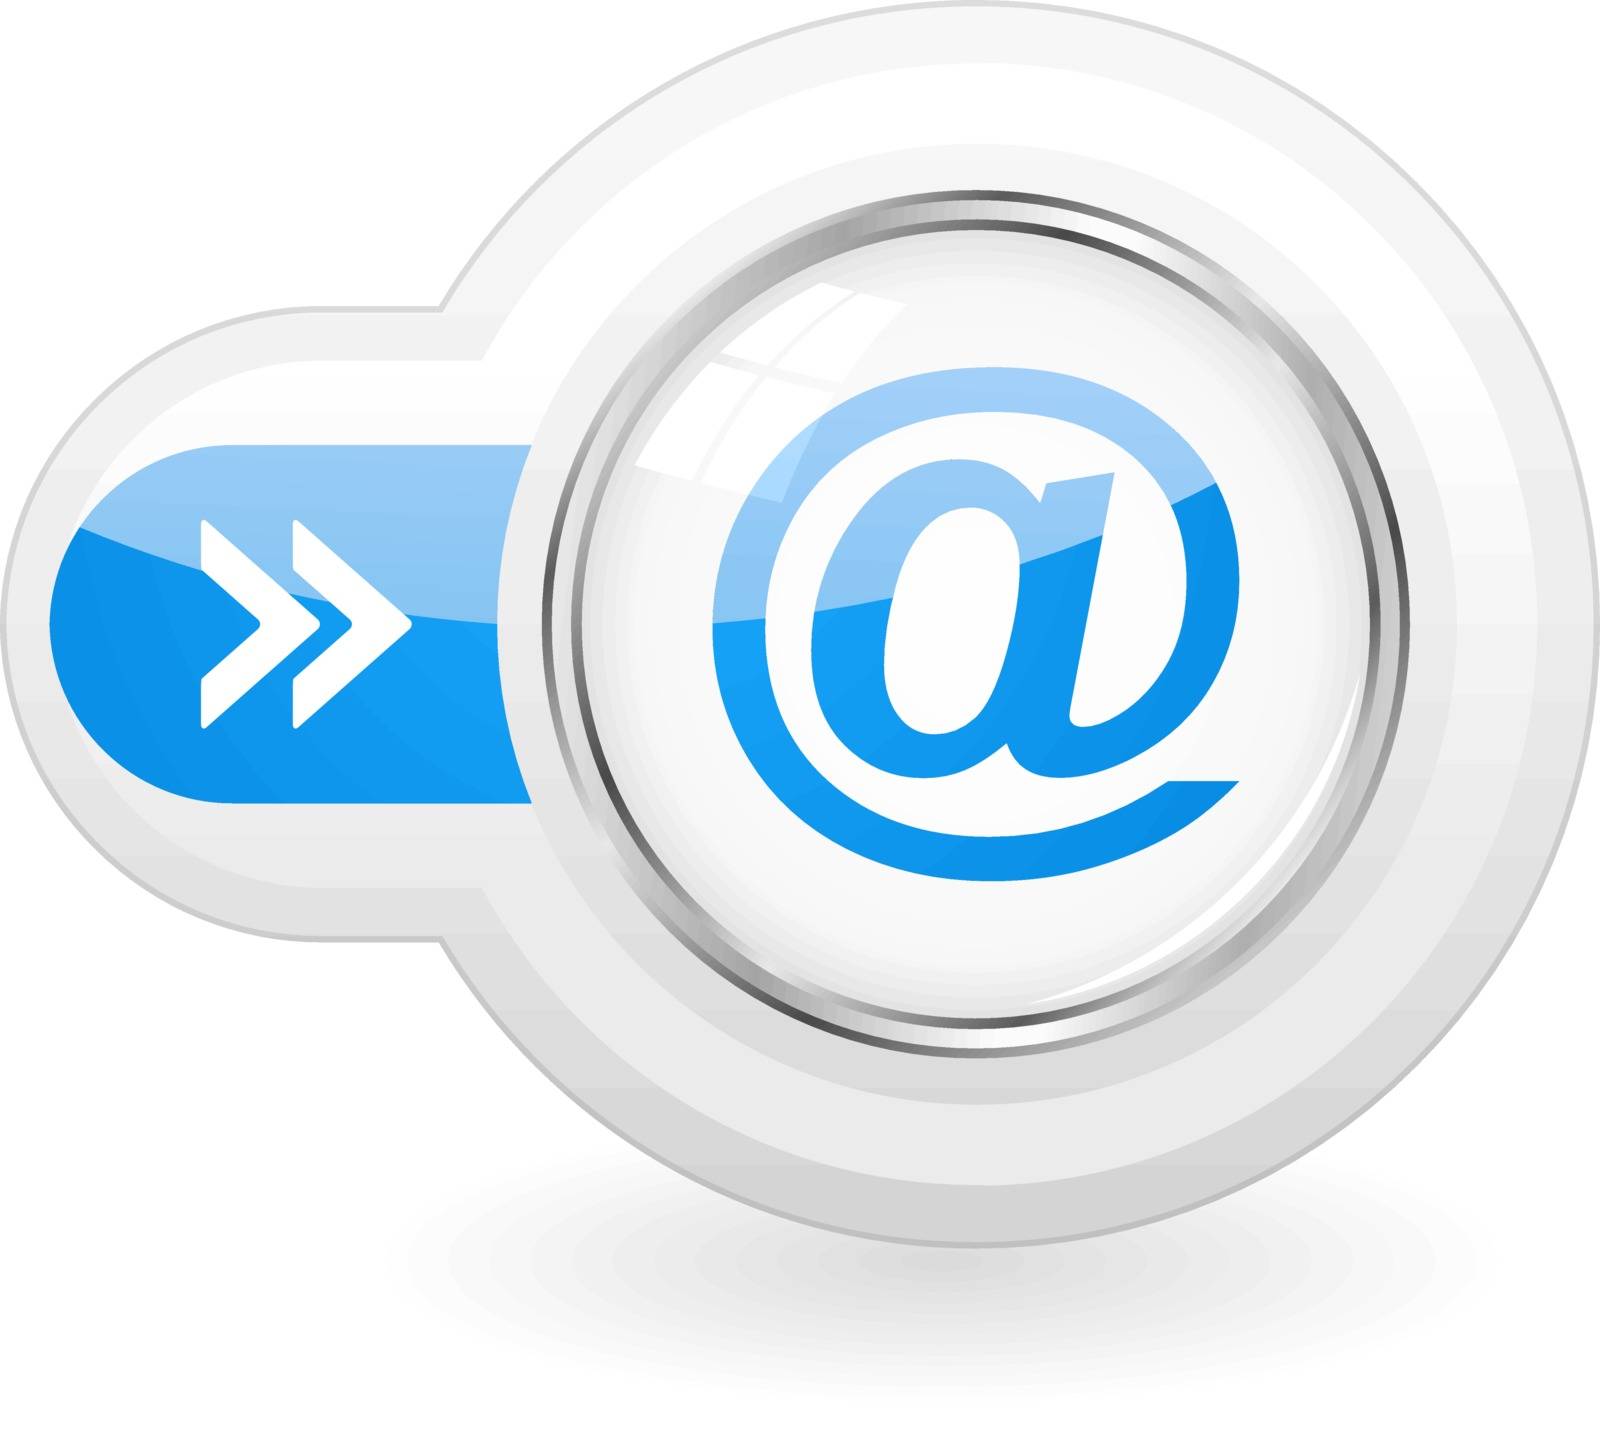 E-MAIL icon. by login